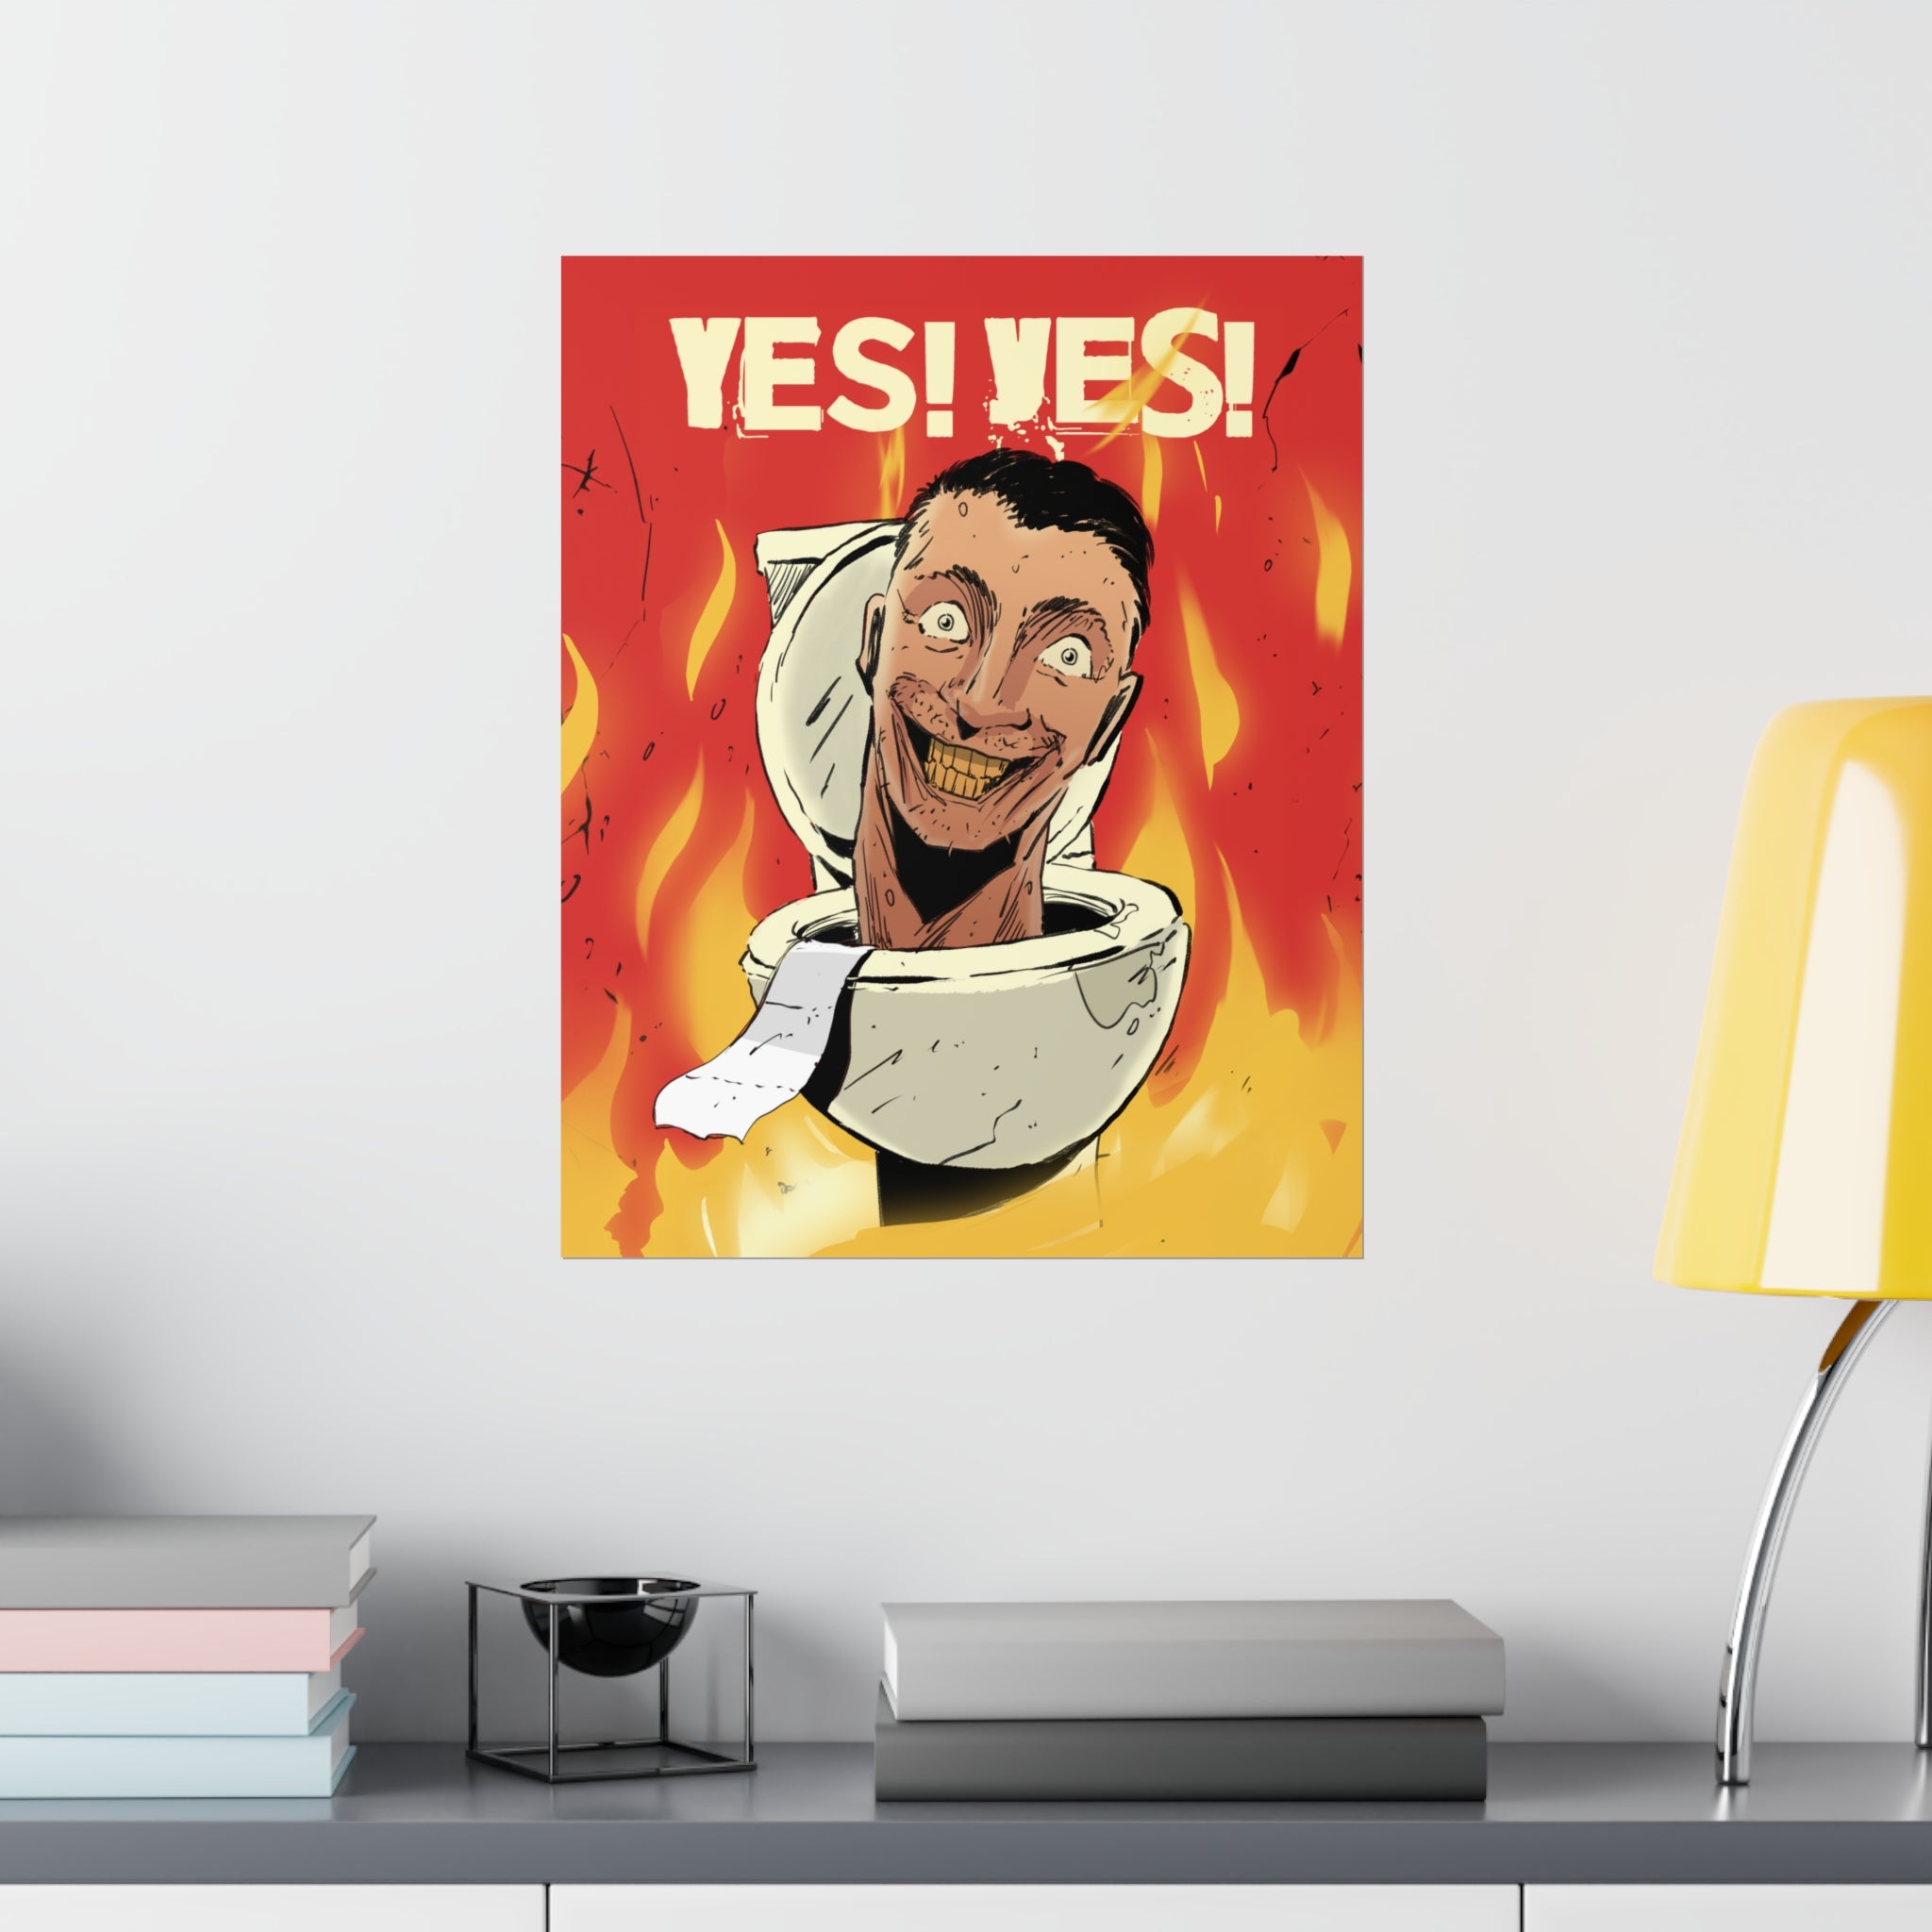 Yes! Yes! Poster Skibidi toilet with flames surrounding him on a poster mocked over a dresser and books candle lamp